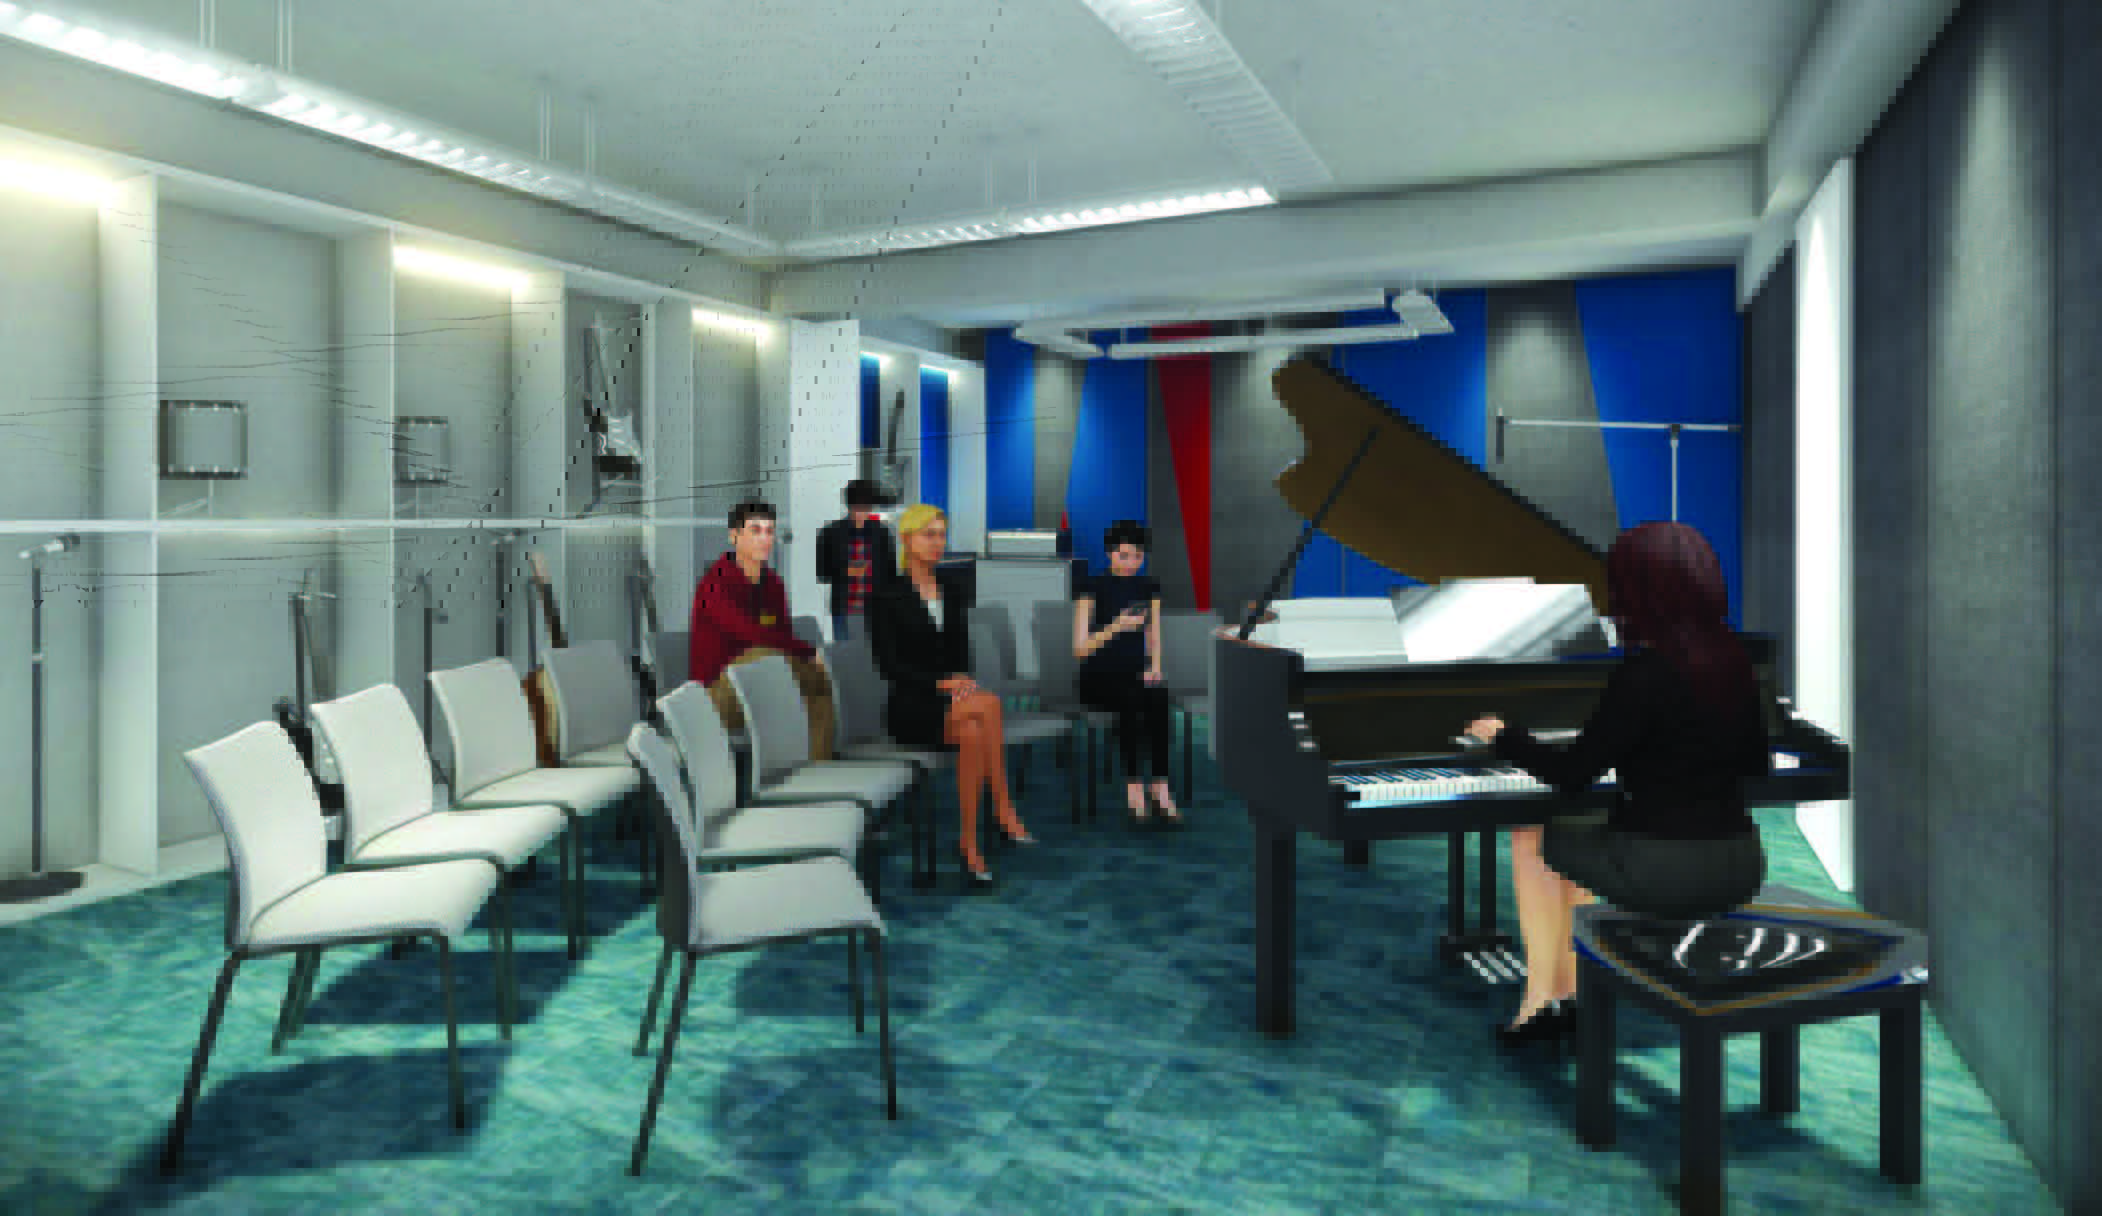 The music room is sound-proof. Students will learn how to sing along with teachers’s organ notes.